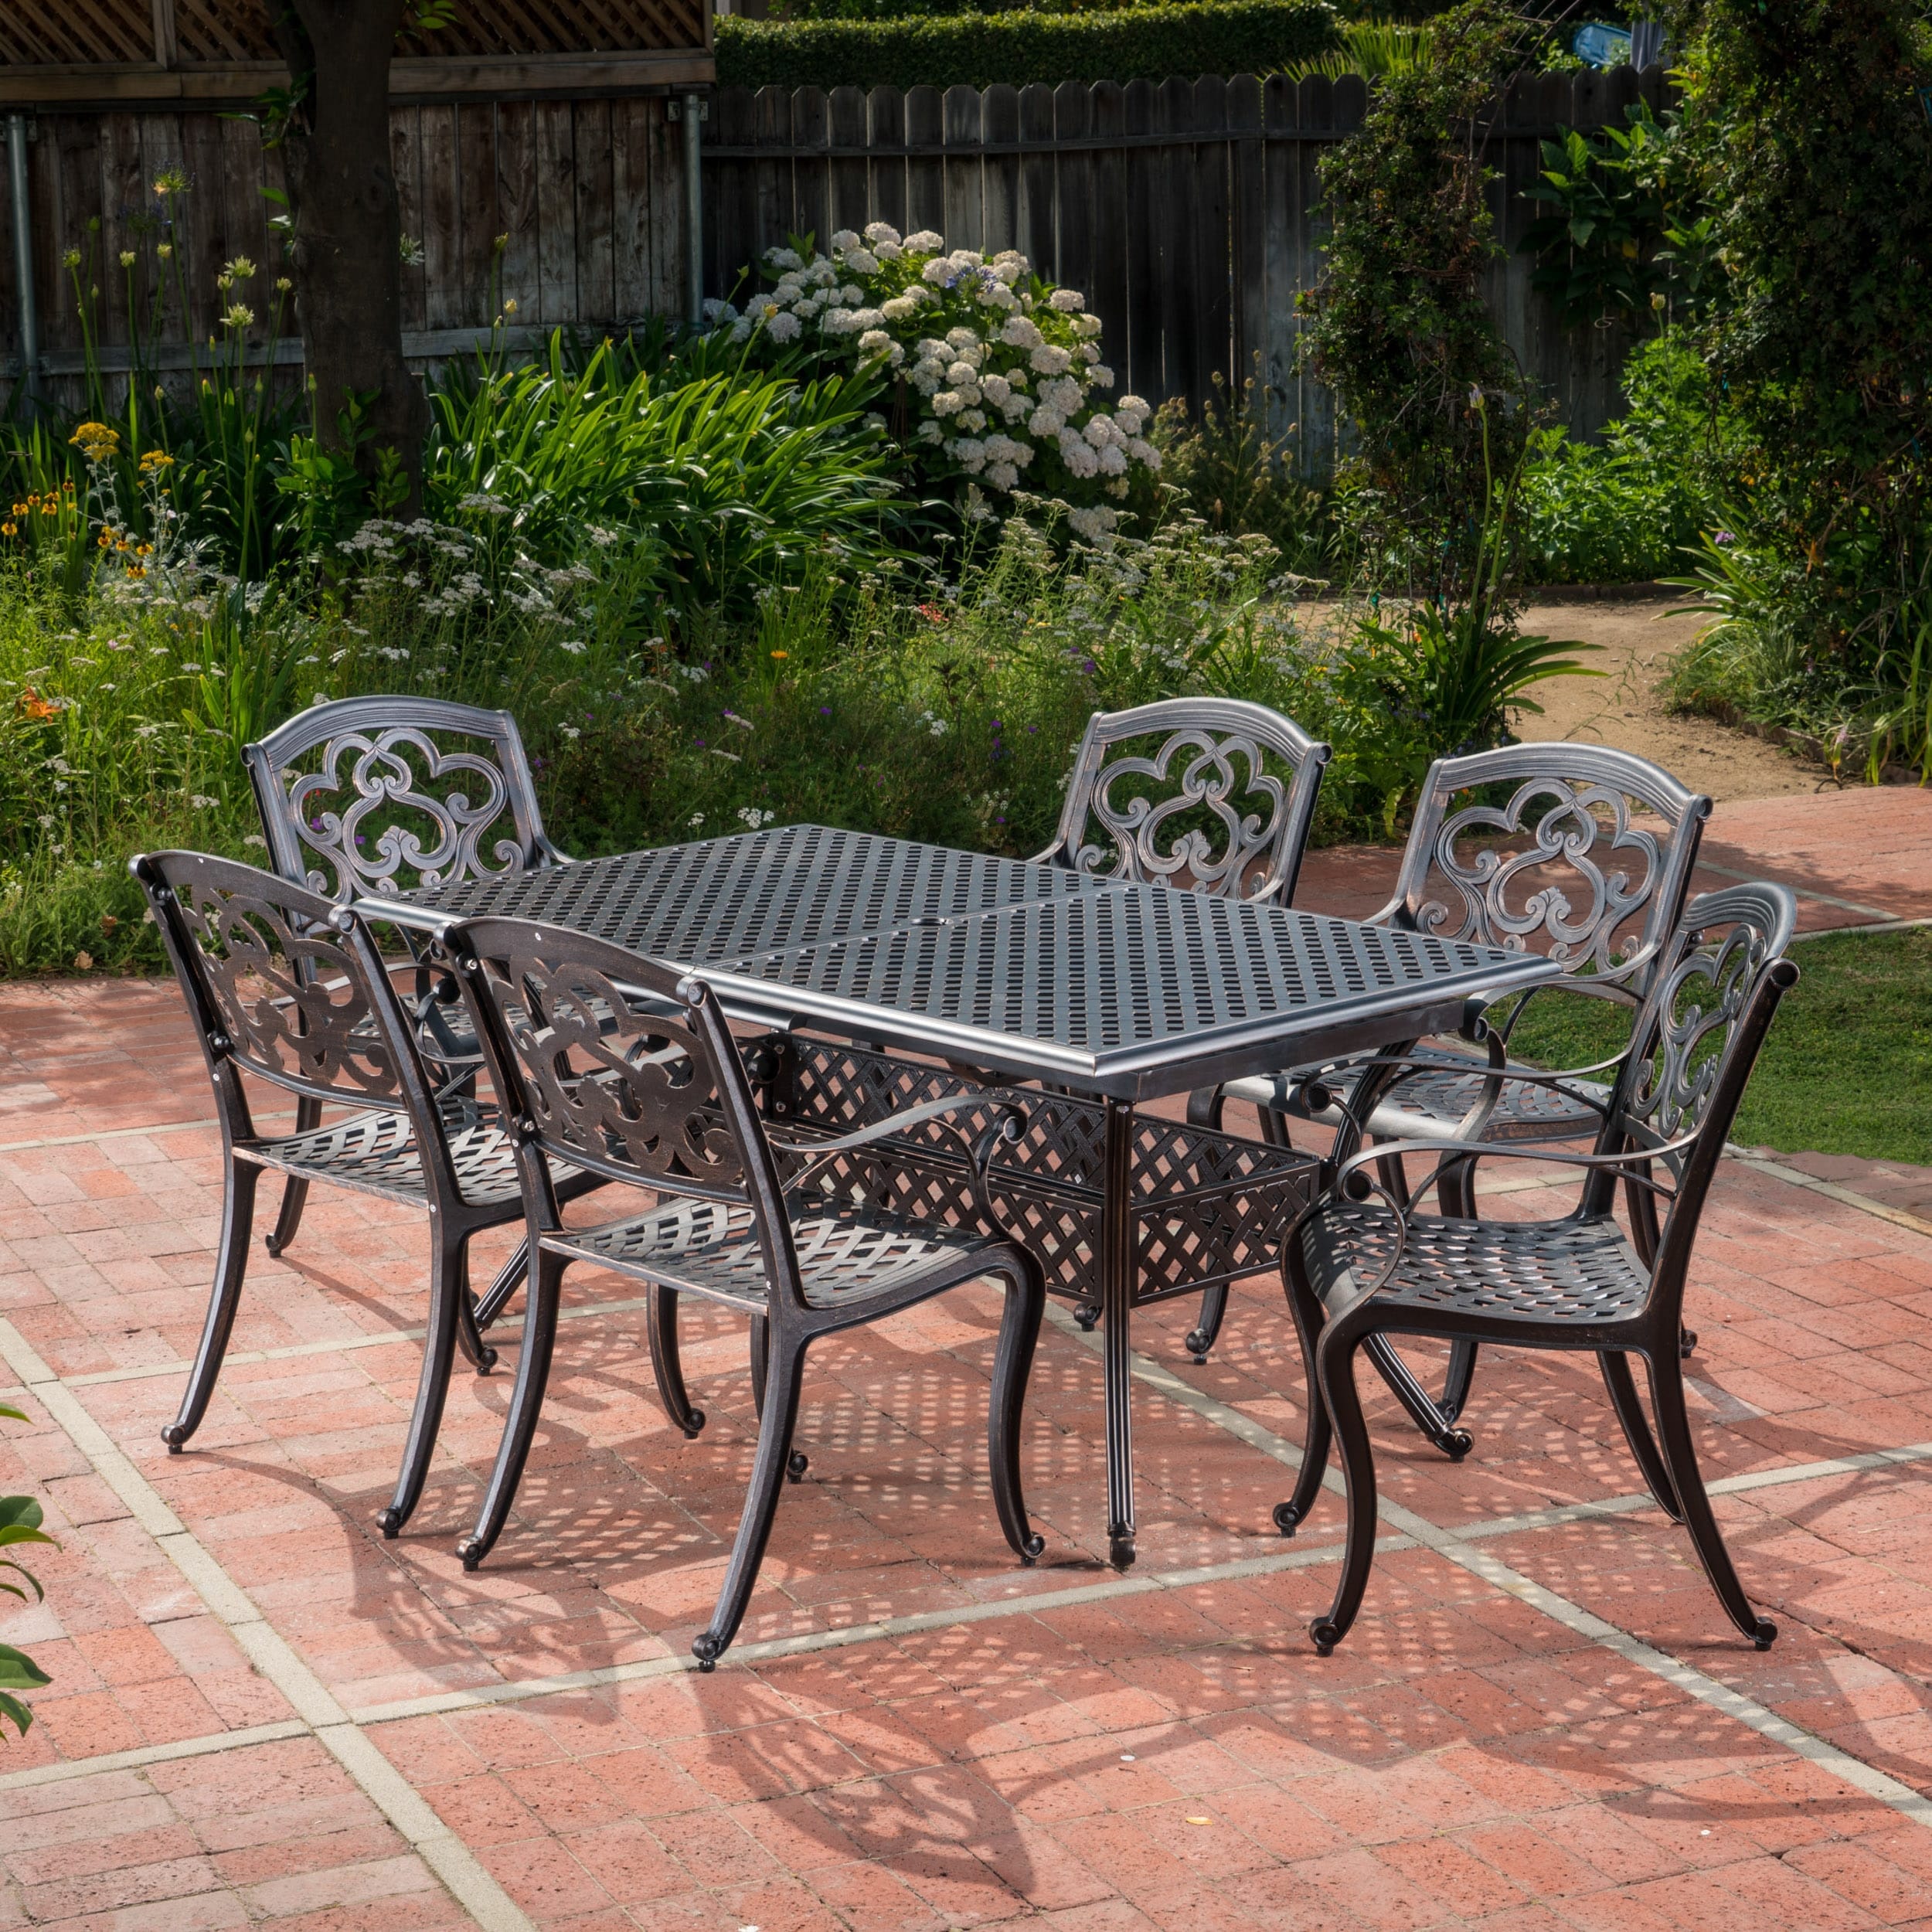 Abigal Outdoor Copper Cast Cast Aluminum Rustic Dining Set By Christopher Knight Home